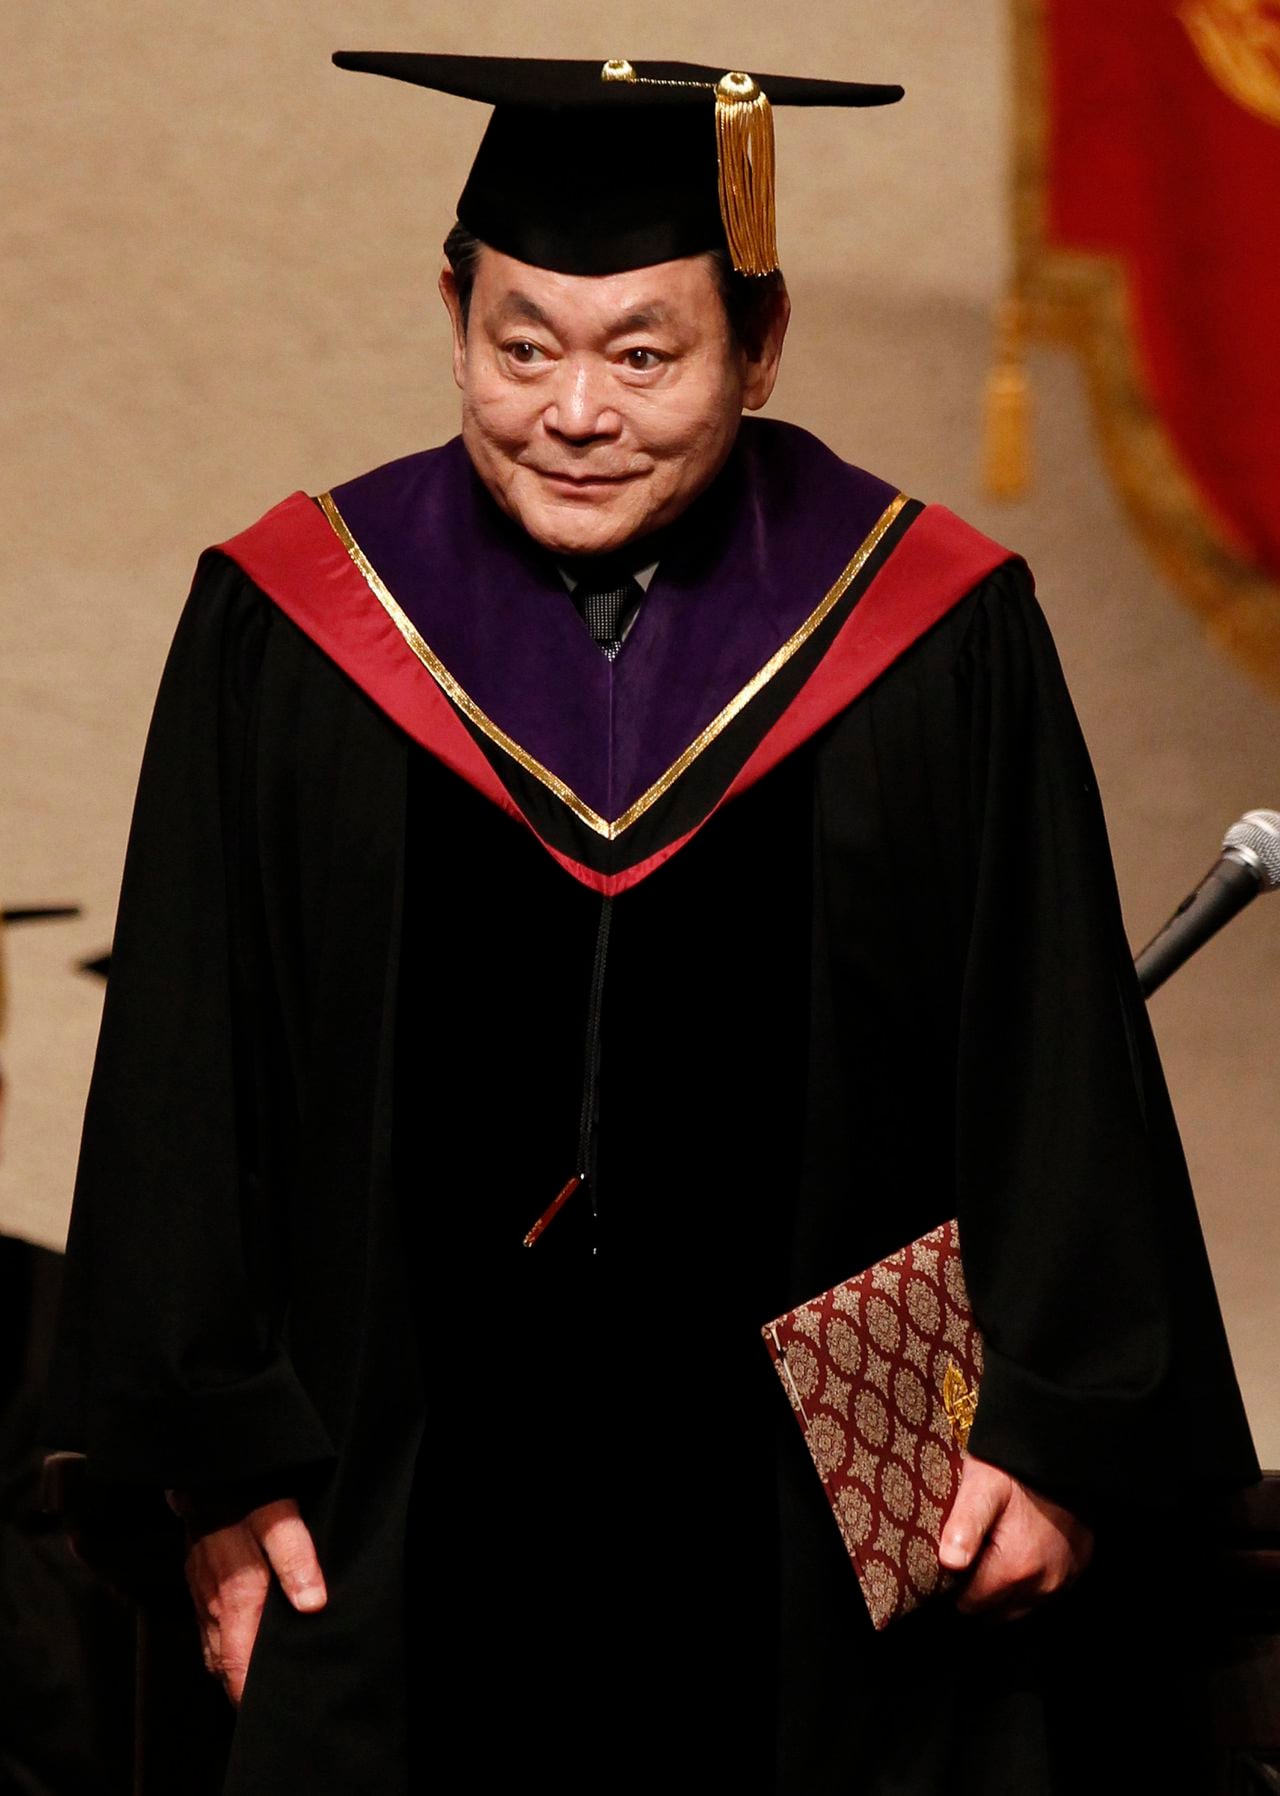 Samsung Electronics Chairman Lee Kun-hee reacts after receiving an honorary doctorate of laws during a commencement ceremony at Waseda University in Tokyo September 20, 2010.   REUTERS/Toru Hanai (JAPAN)